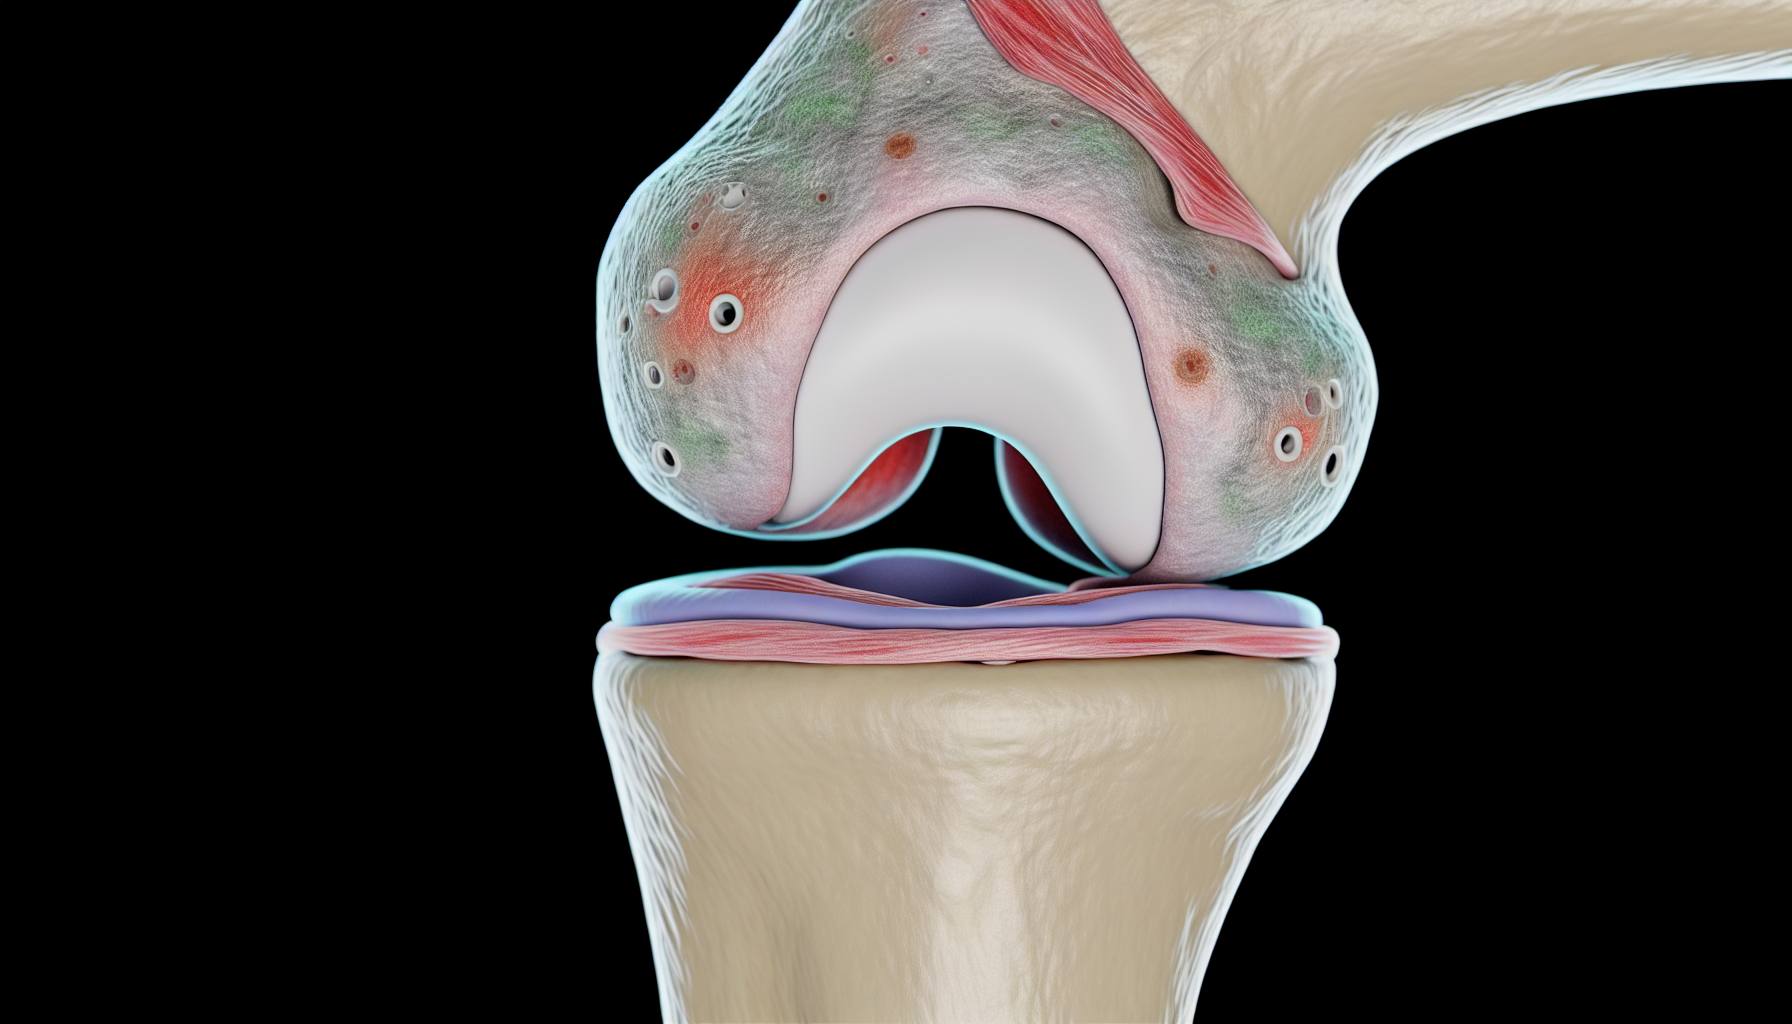 A close-up of a human knee joint with a focus on joint degeneration